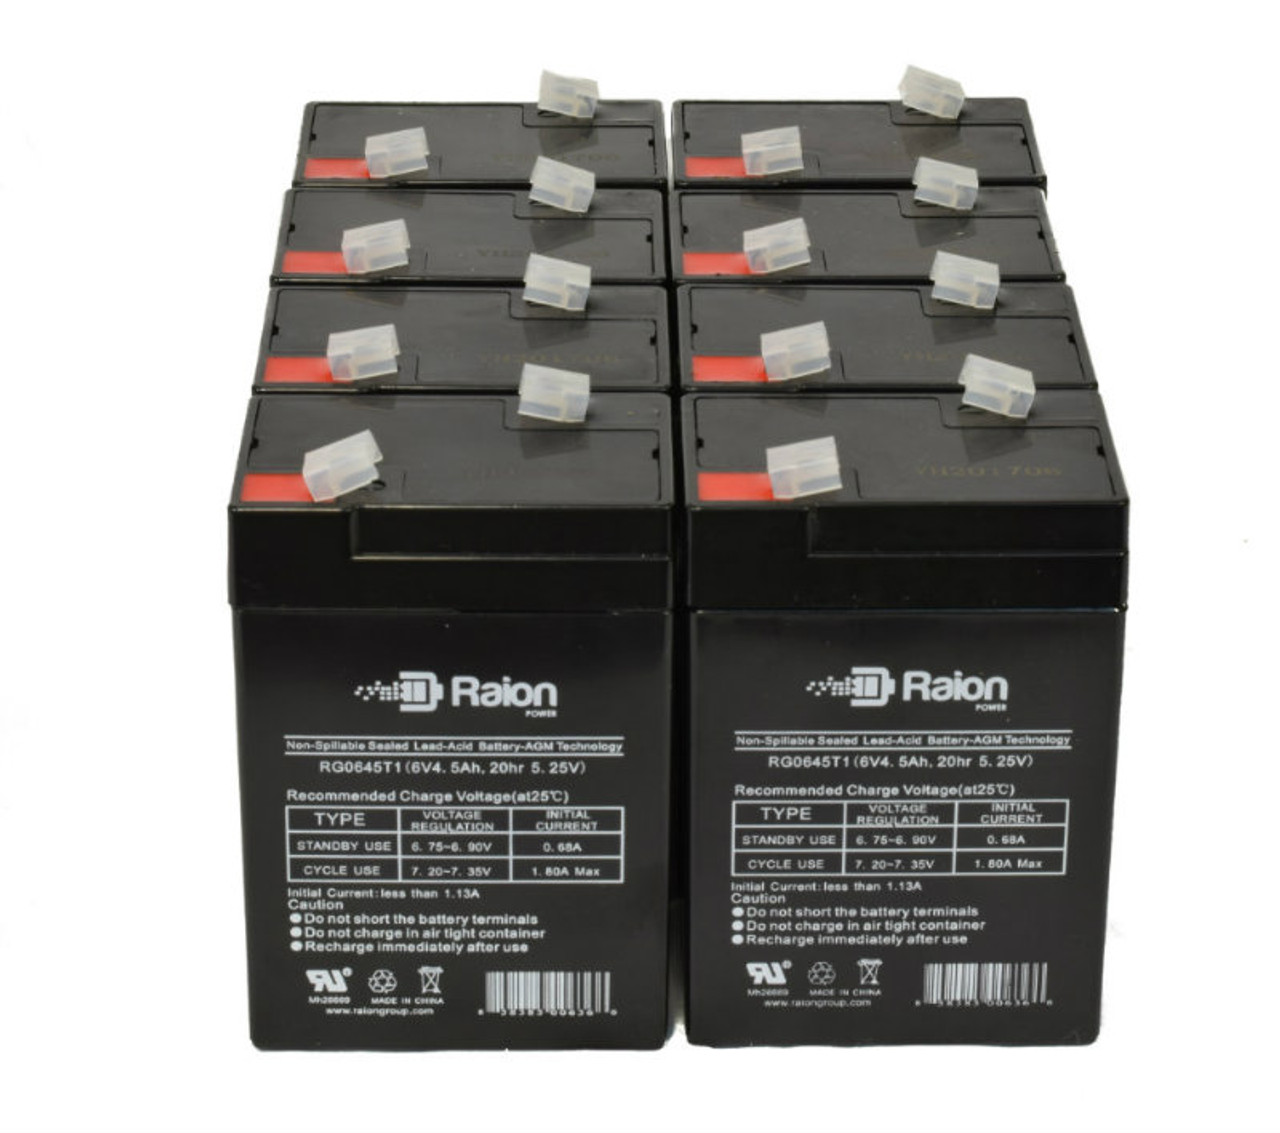 Raion Power 6 Volt 4.5Ah RG0645T1 Replacement Battery for MUST FC6-4 - 8 Pack